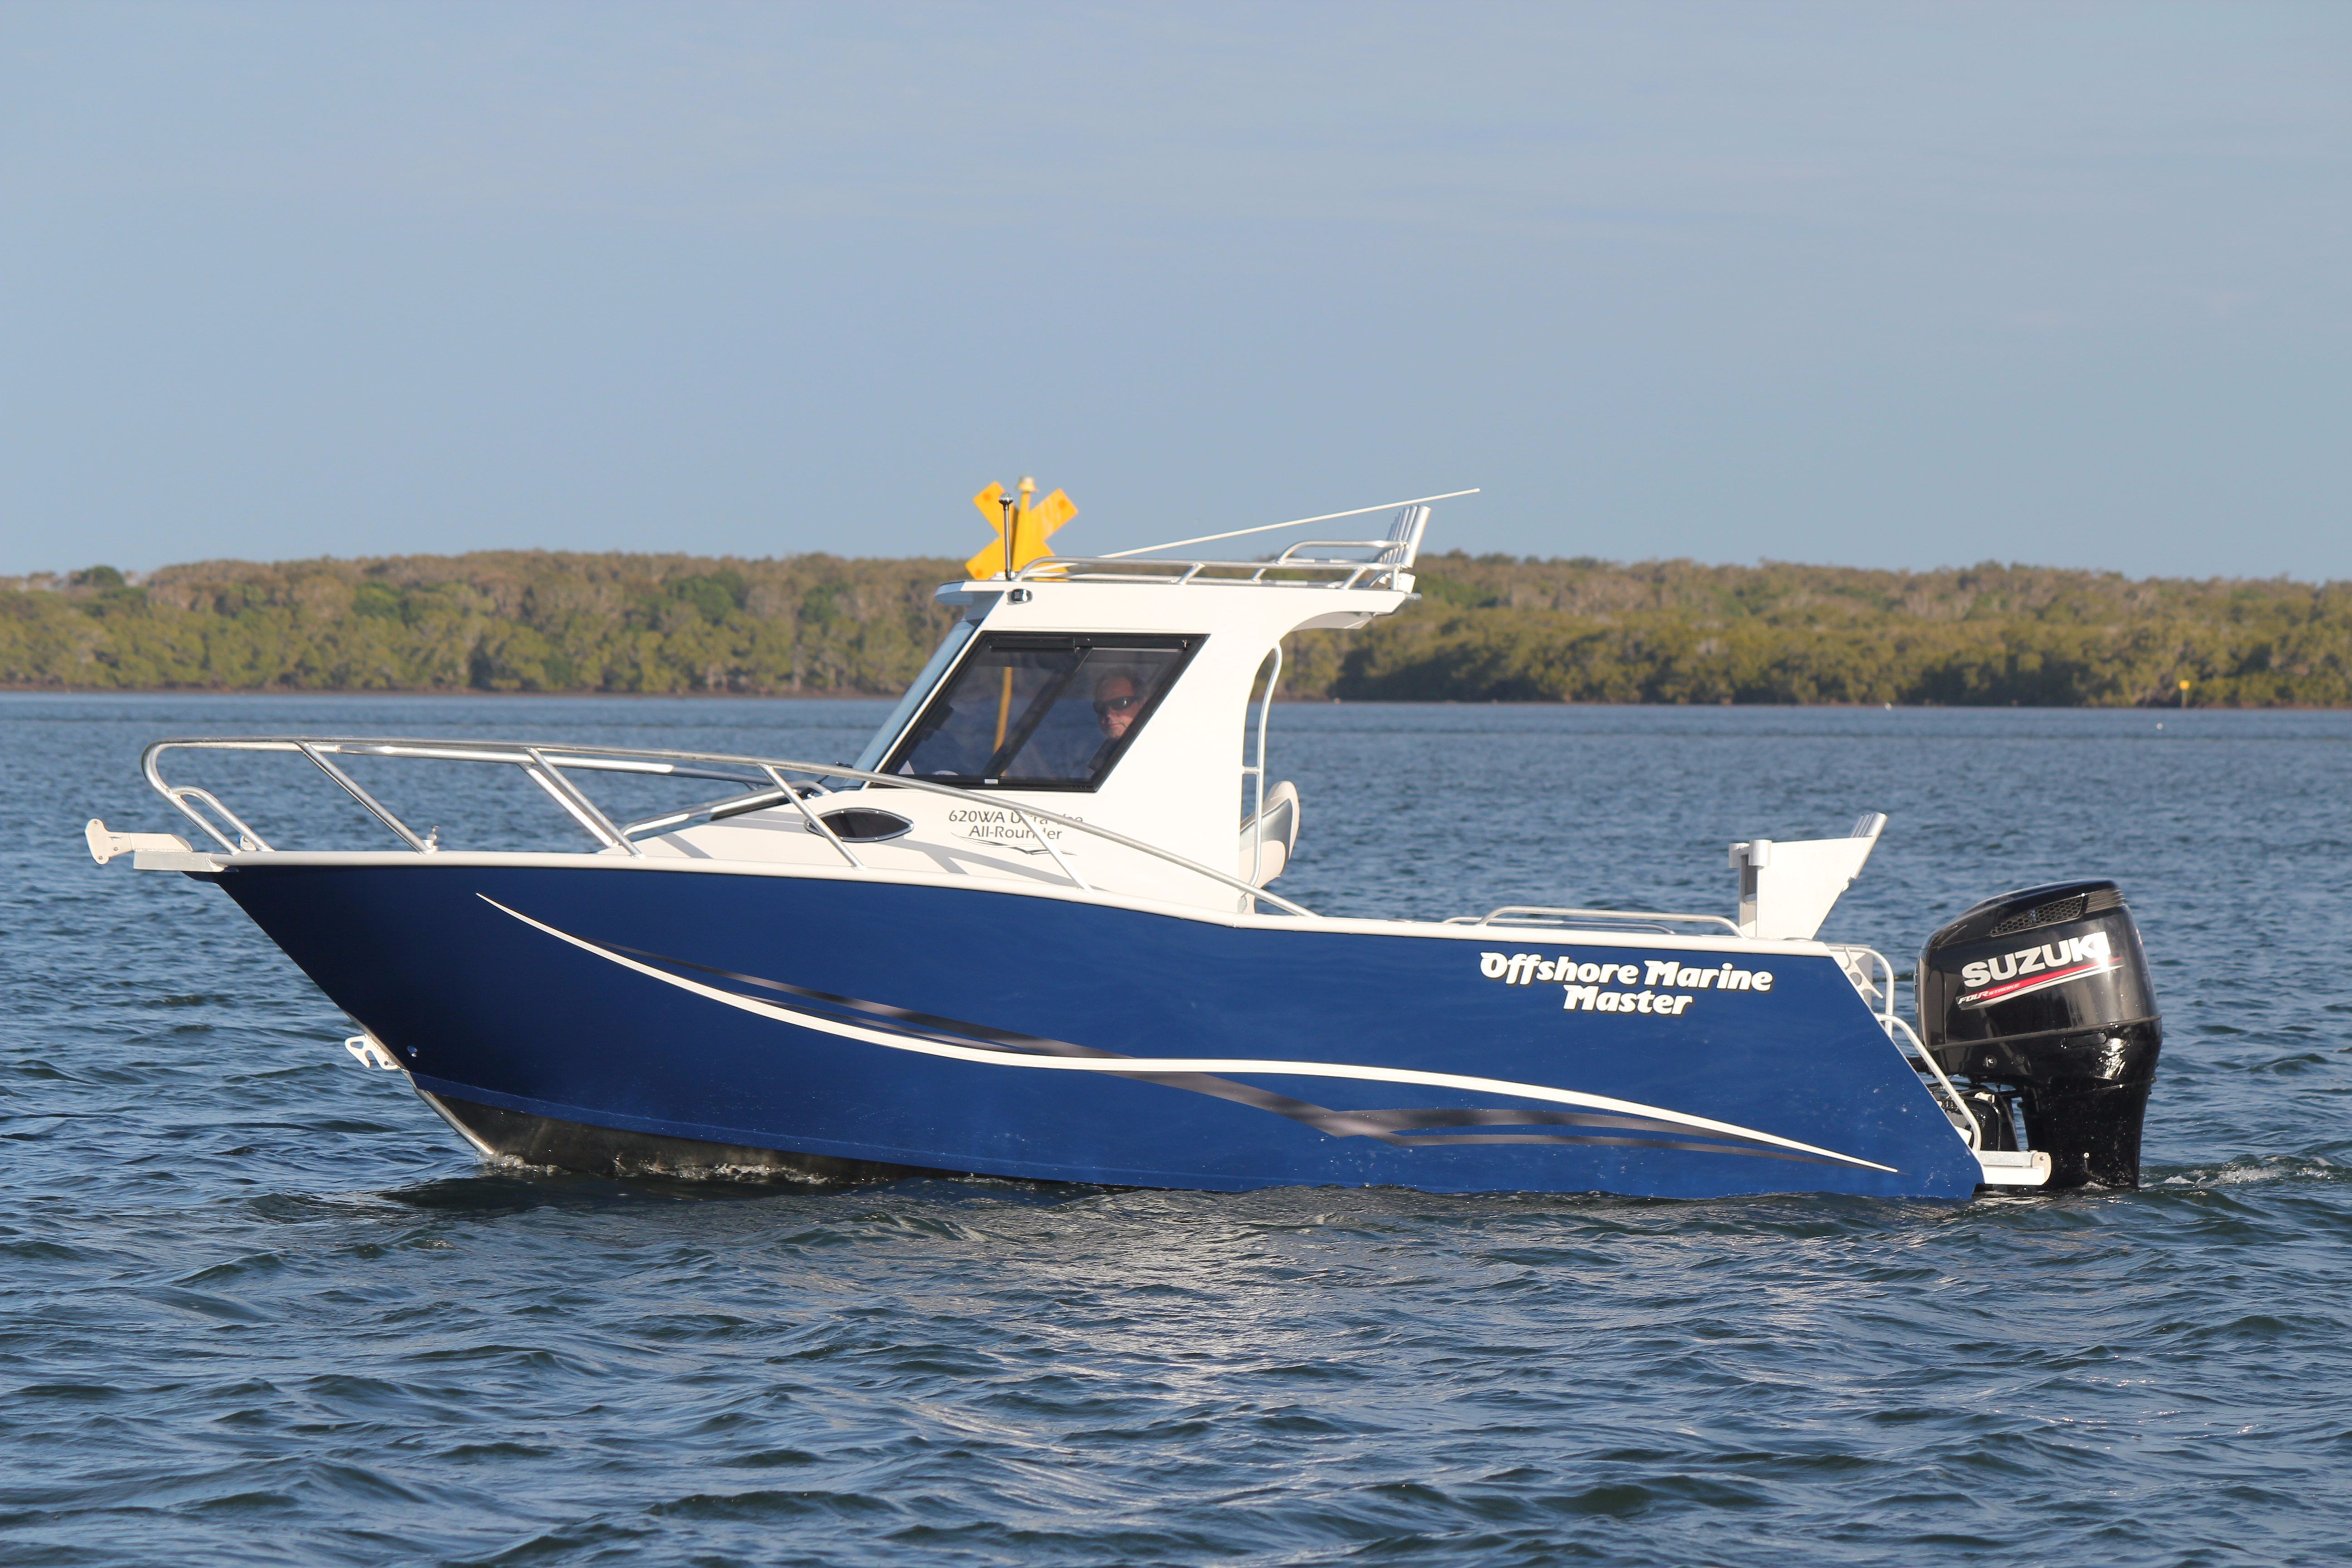 Custom Boat Brands  International Society of Precision Agriculture